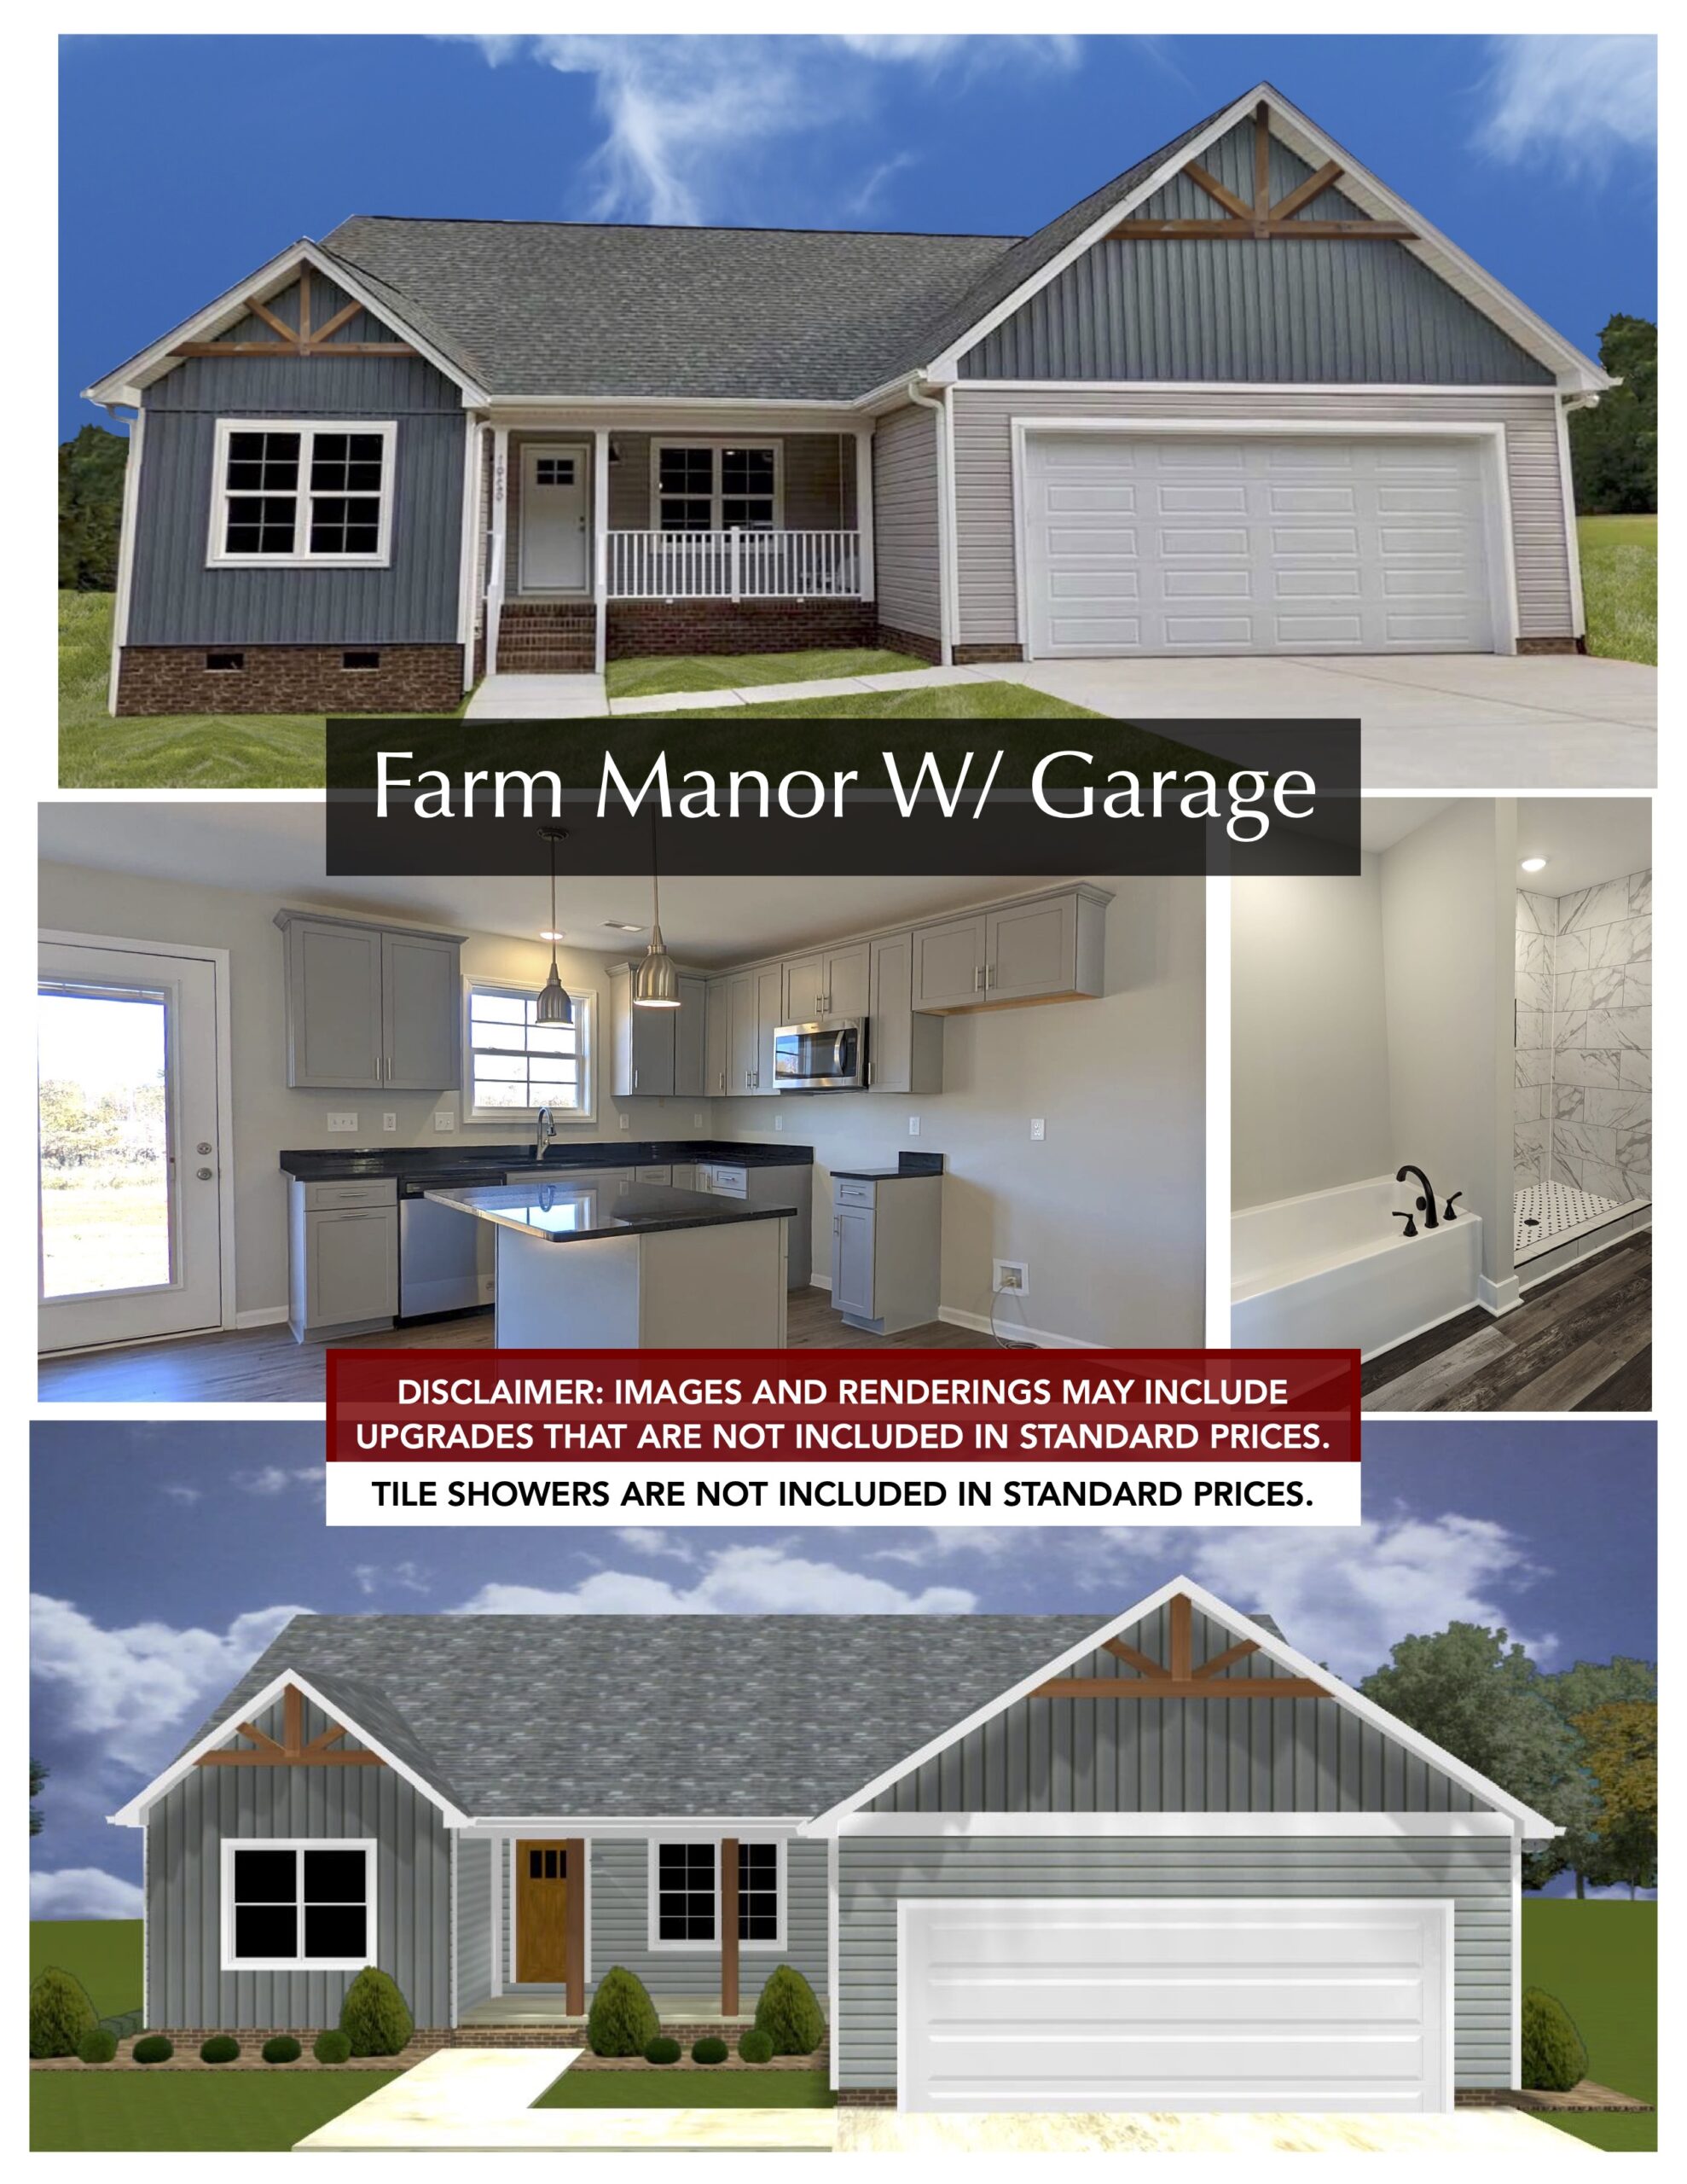 the farm manor plan with garage